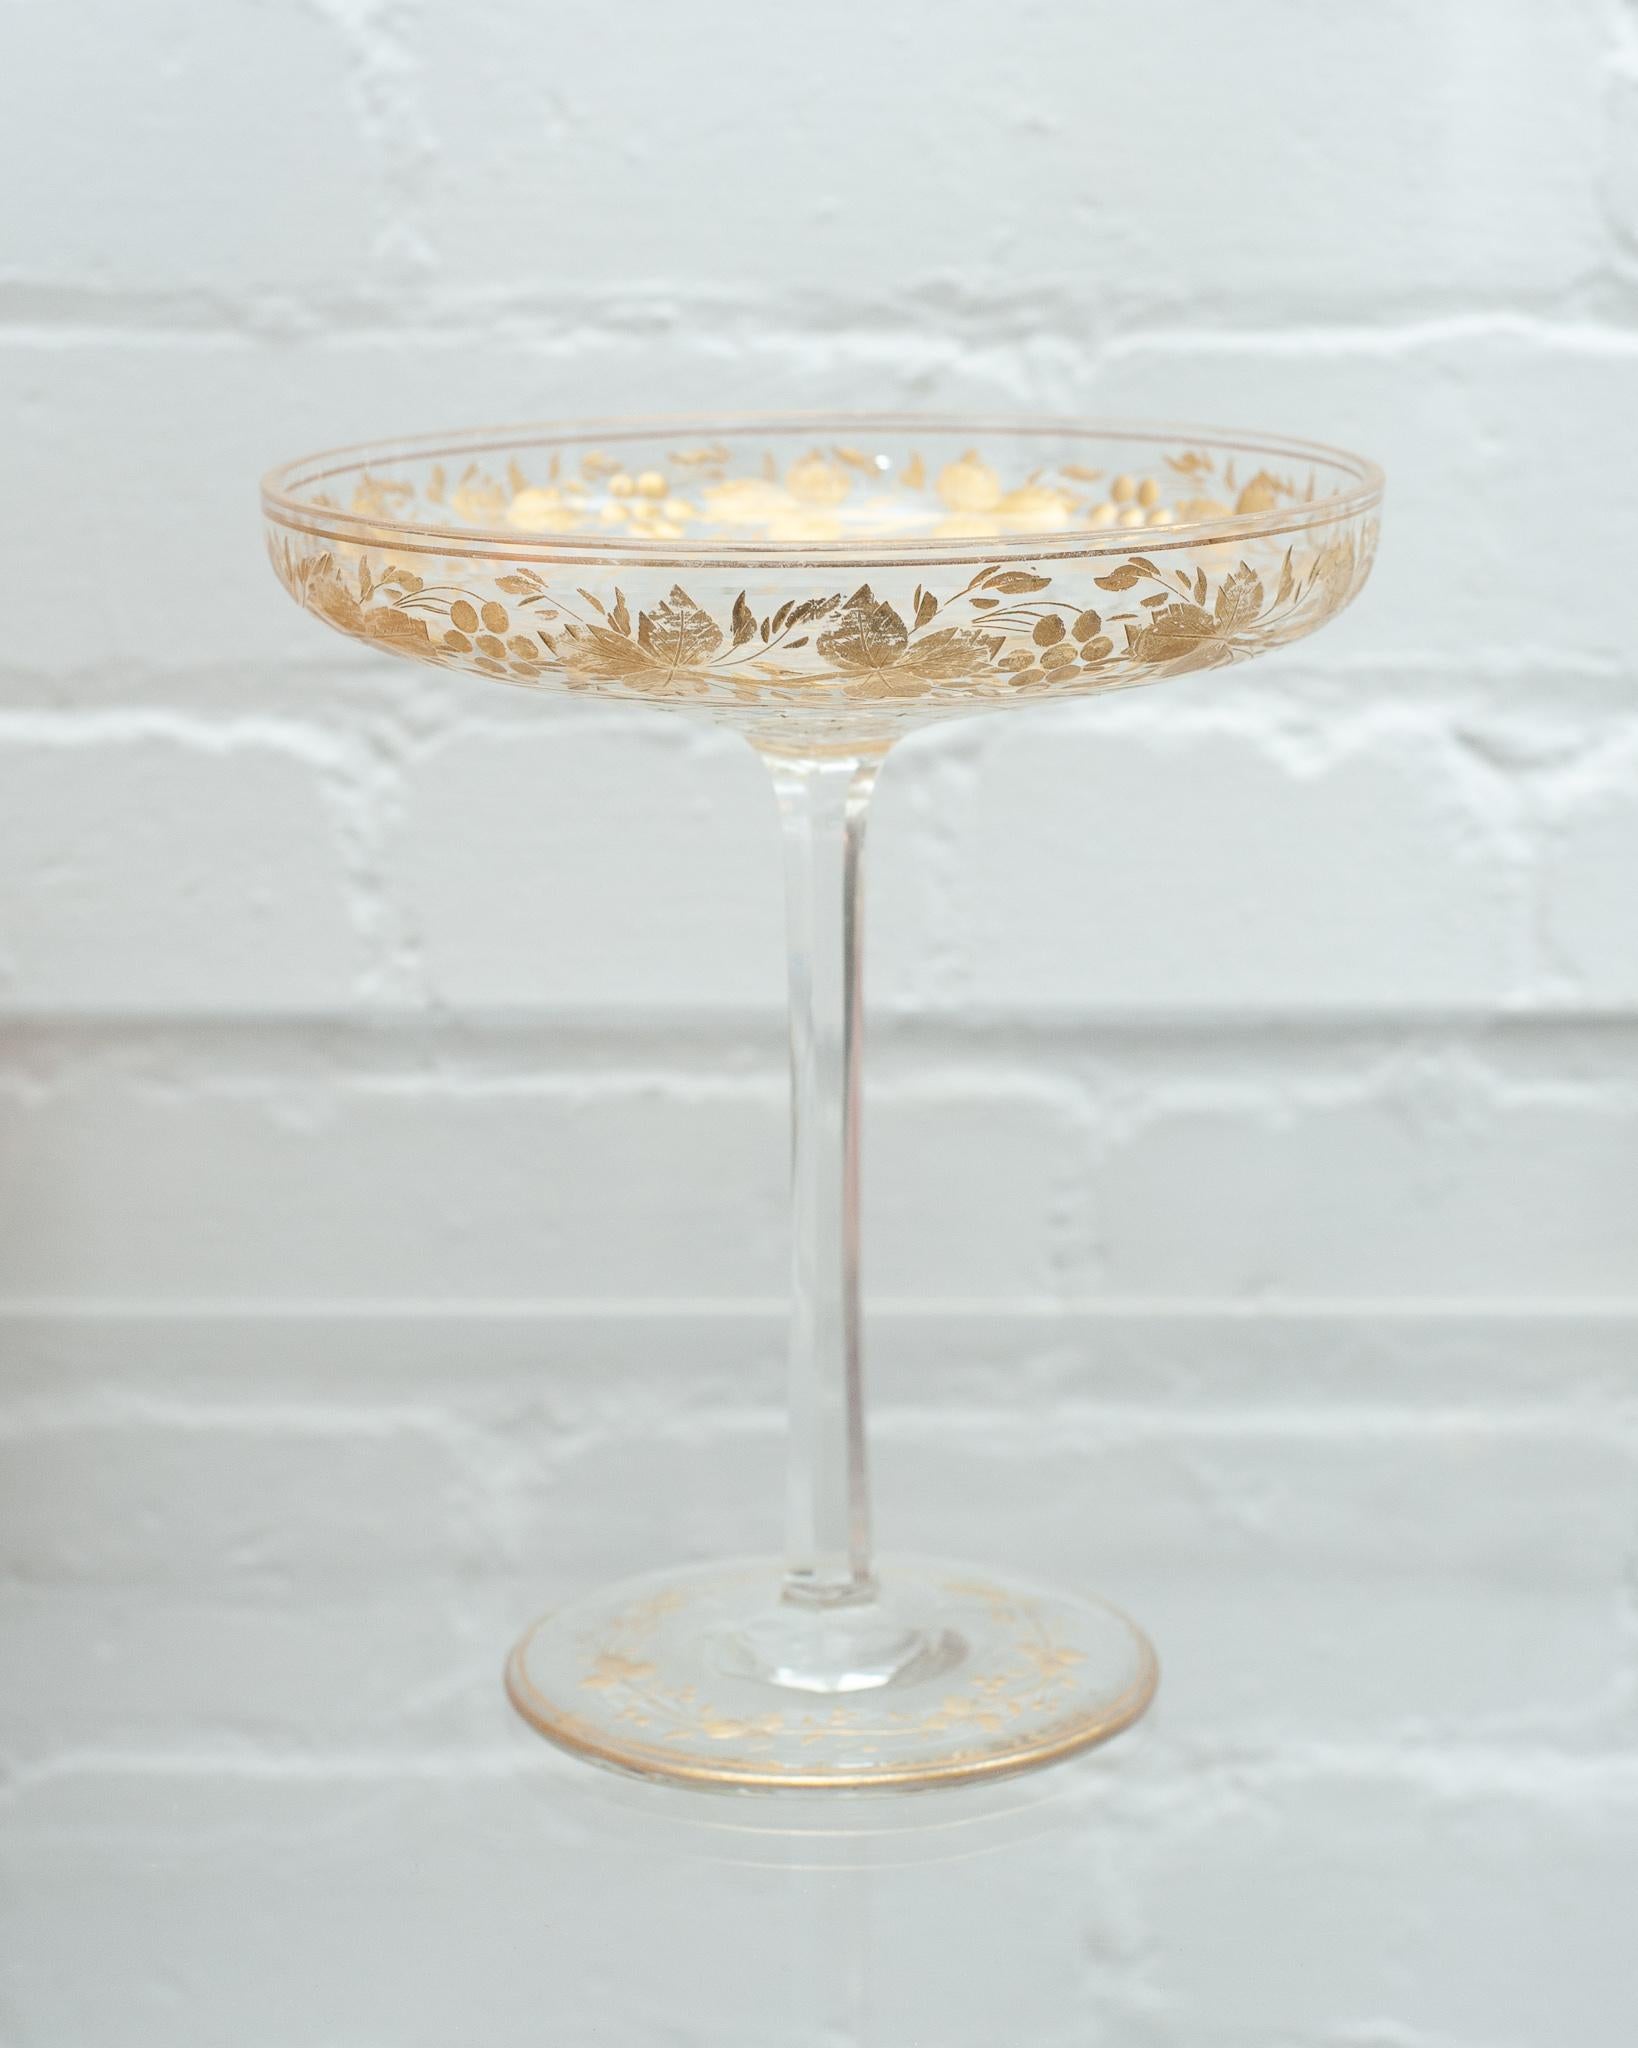 A stunning etched and gilded antique Moser crystal compote / tazza. A fine example of top quality craftsmanship from the turn of the century. Perfect for decorative or serving use.